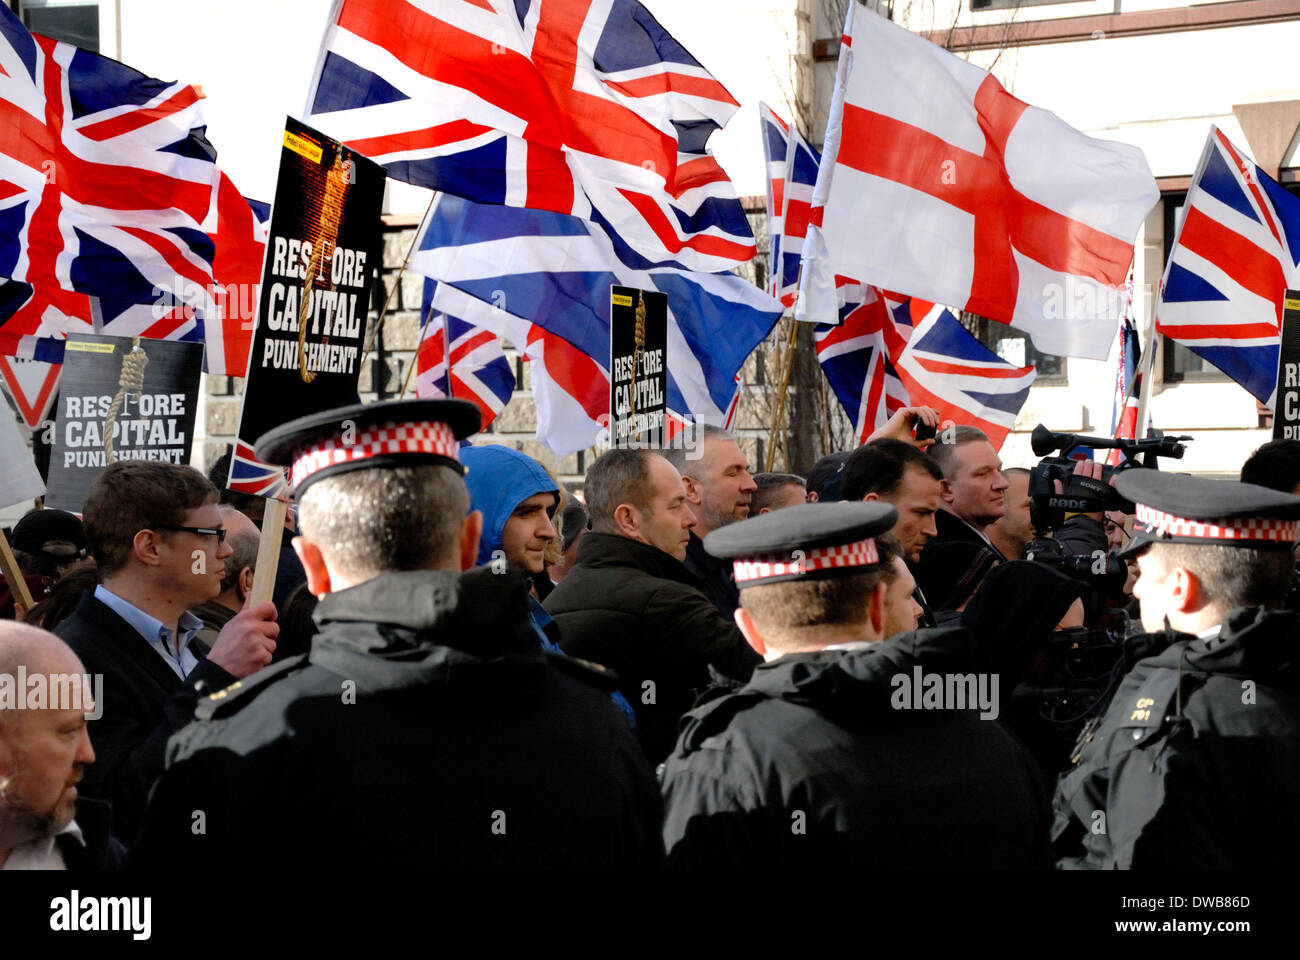 London. Metropolitan police controlling a right-wing crowd ...